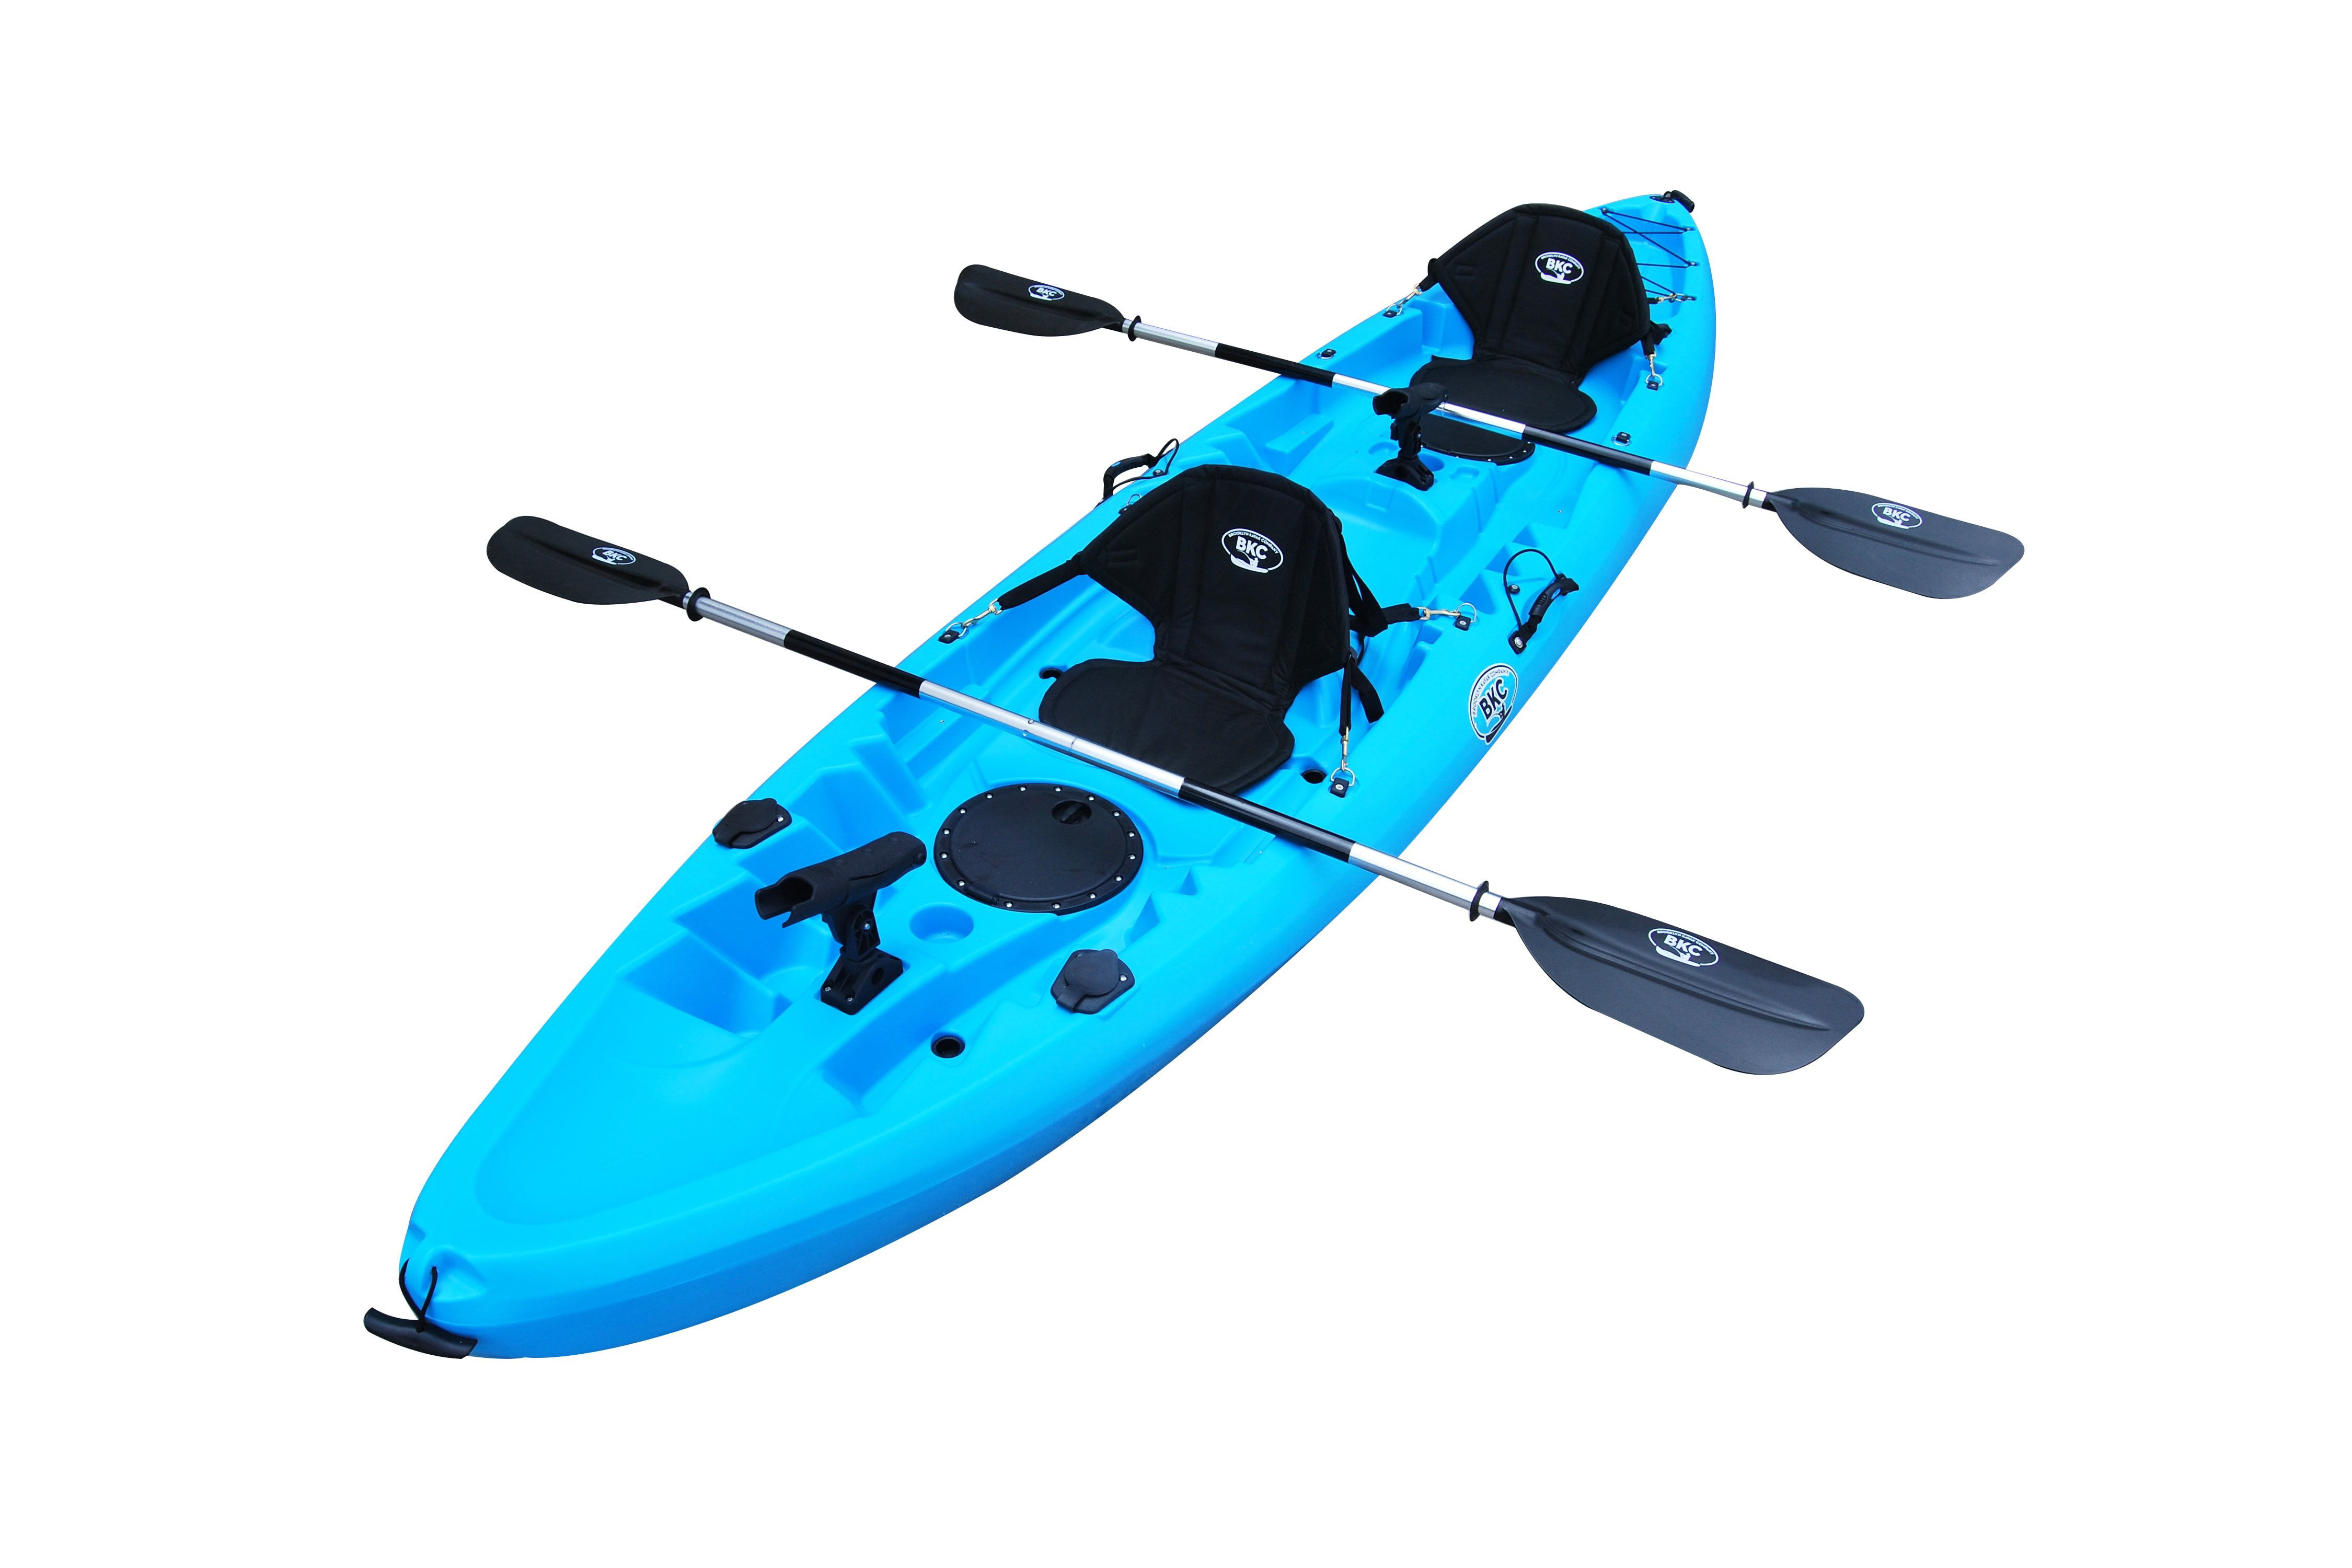 BKC UH-TK219 12 foot Tandem Sit On Top Kayak 2 or 3 person with 2 Paddles  and Seats and 5 Fishing Rod Holders Included (Sky Blue) 